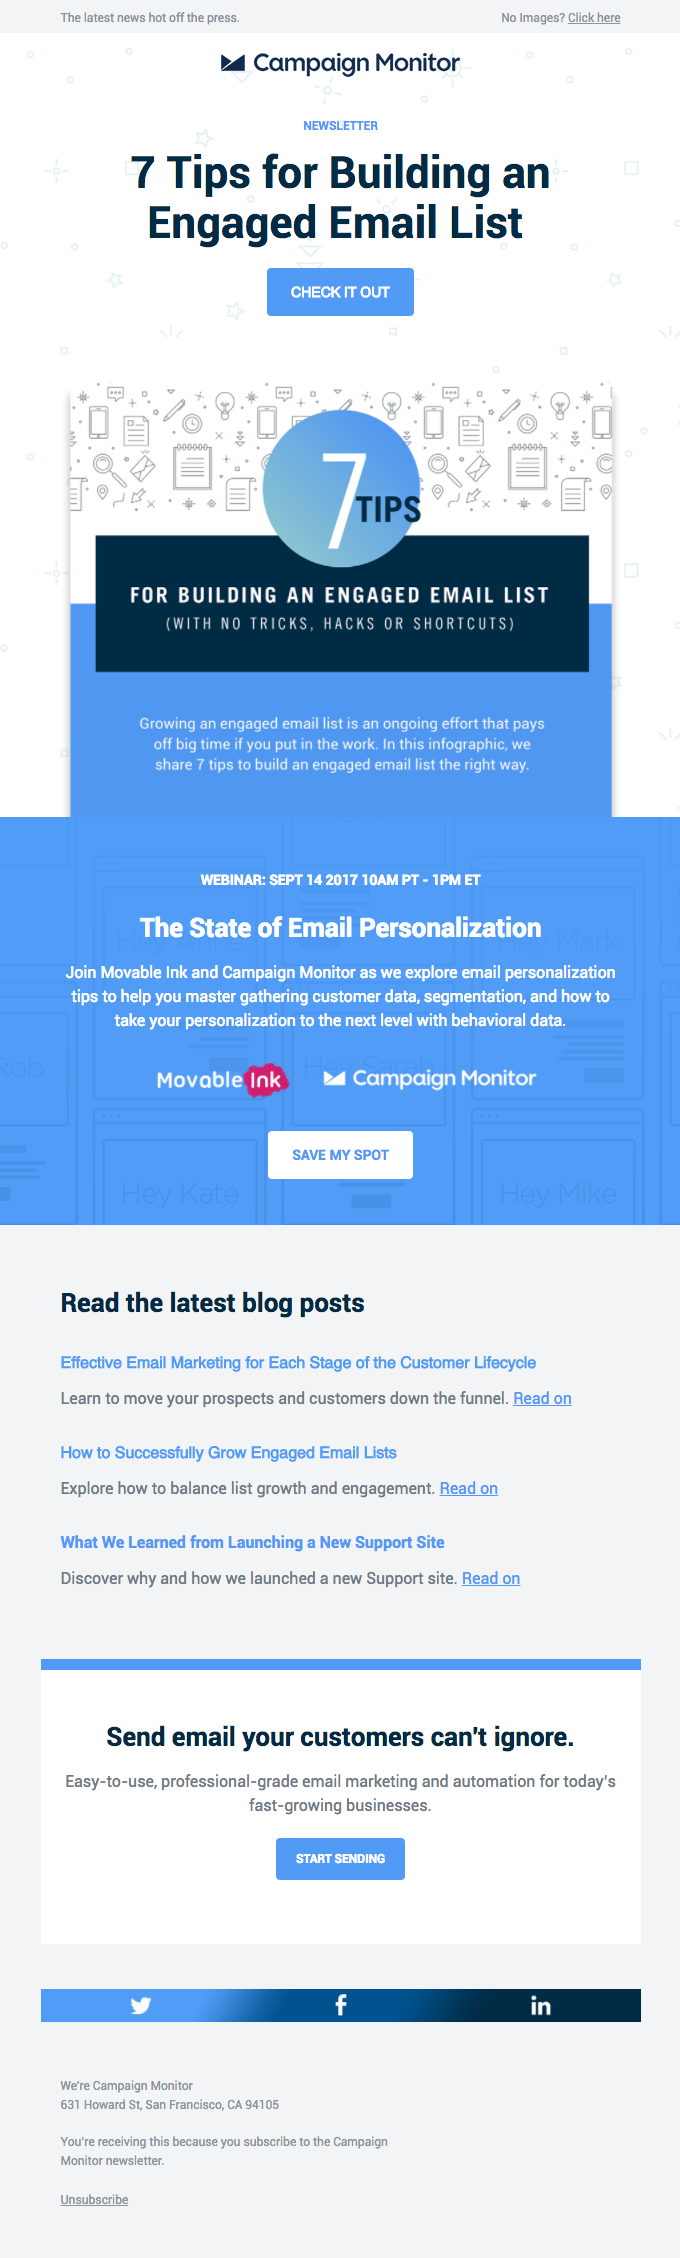 September News: 7 Tips to Build an Engaged Email List + The State of Email Personalization